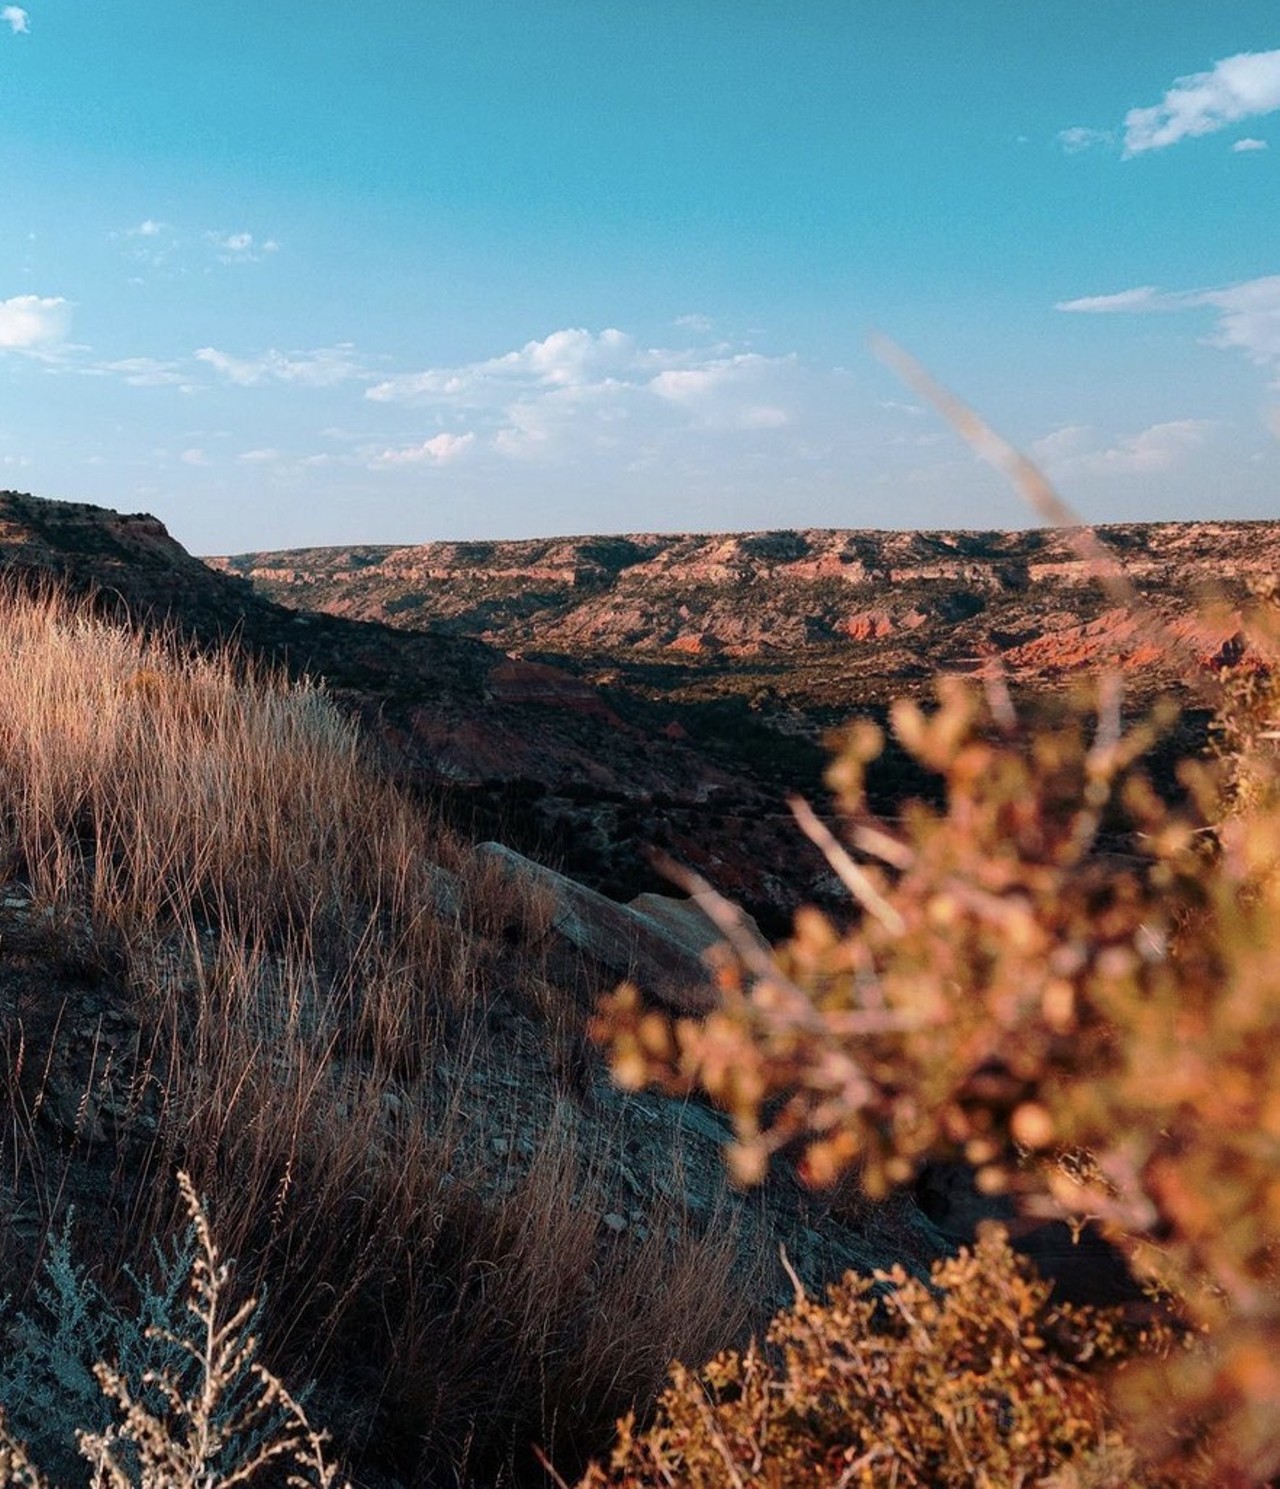 Palo Duro Canyon State Park
11450 State Hwy Park Rd 5, Canyon, tpwd.texas.gov
Need a reason to road trip? Let Palo Duro be reason enough for you. Located in the Panhandle, this state park is home to the second-largest canyon in the U.S. – yes, it’s that big. Make it a point to visit sometime – this fall if you can.
Photo via Instagram / forrestdew